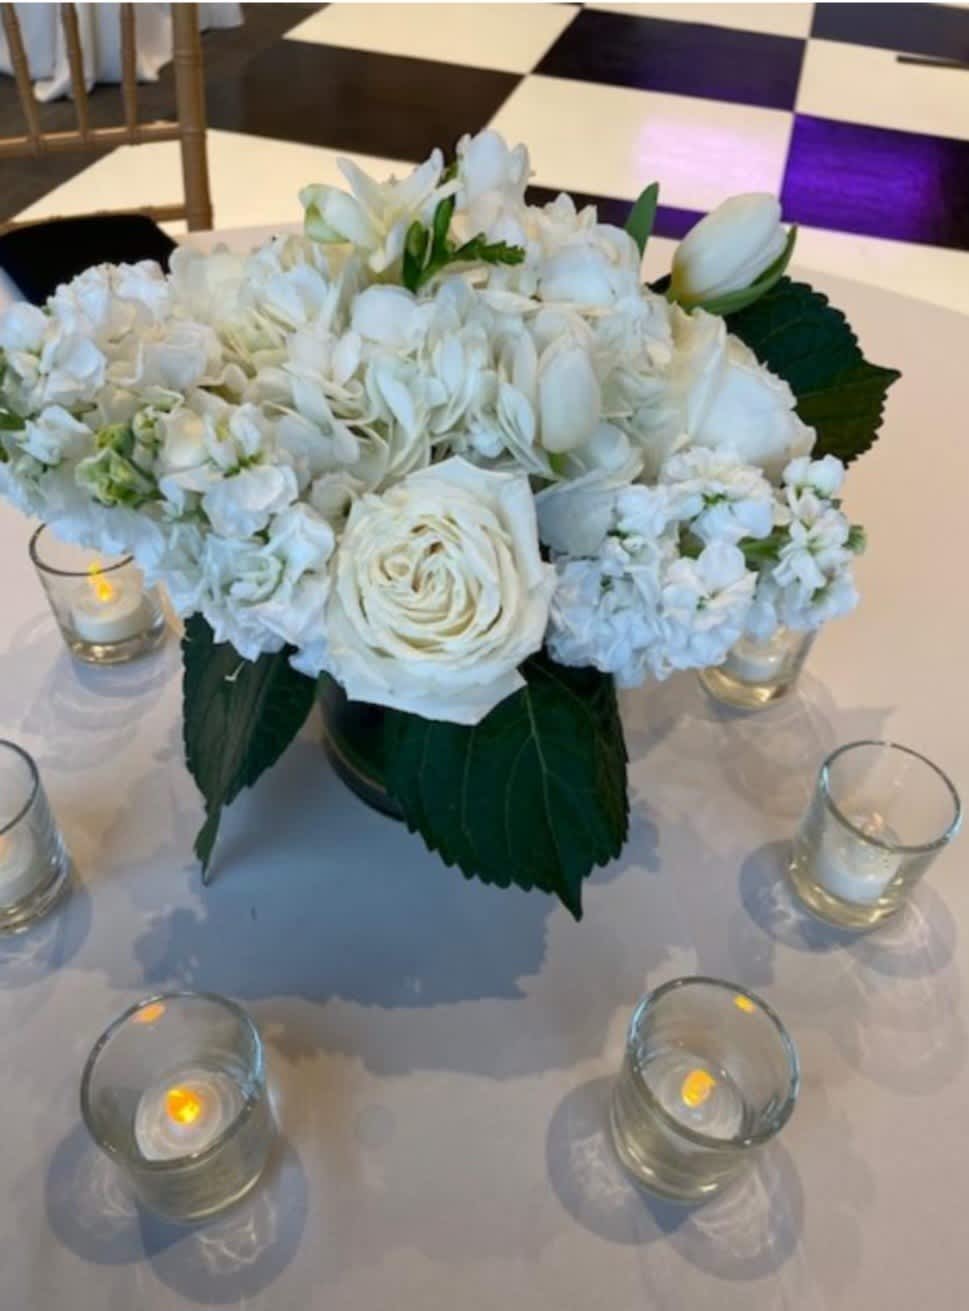 White Roses, White Stock and White Tulips in a beautiful compact arrangement.